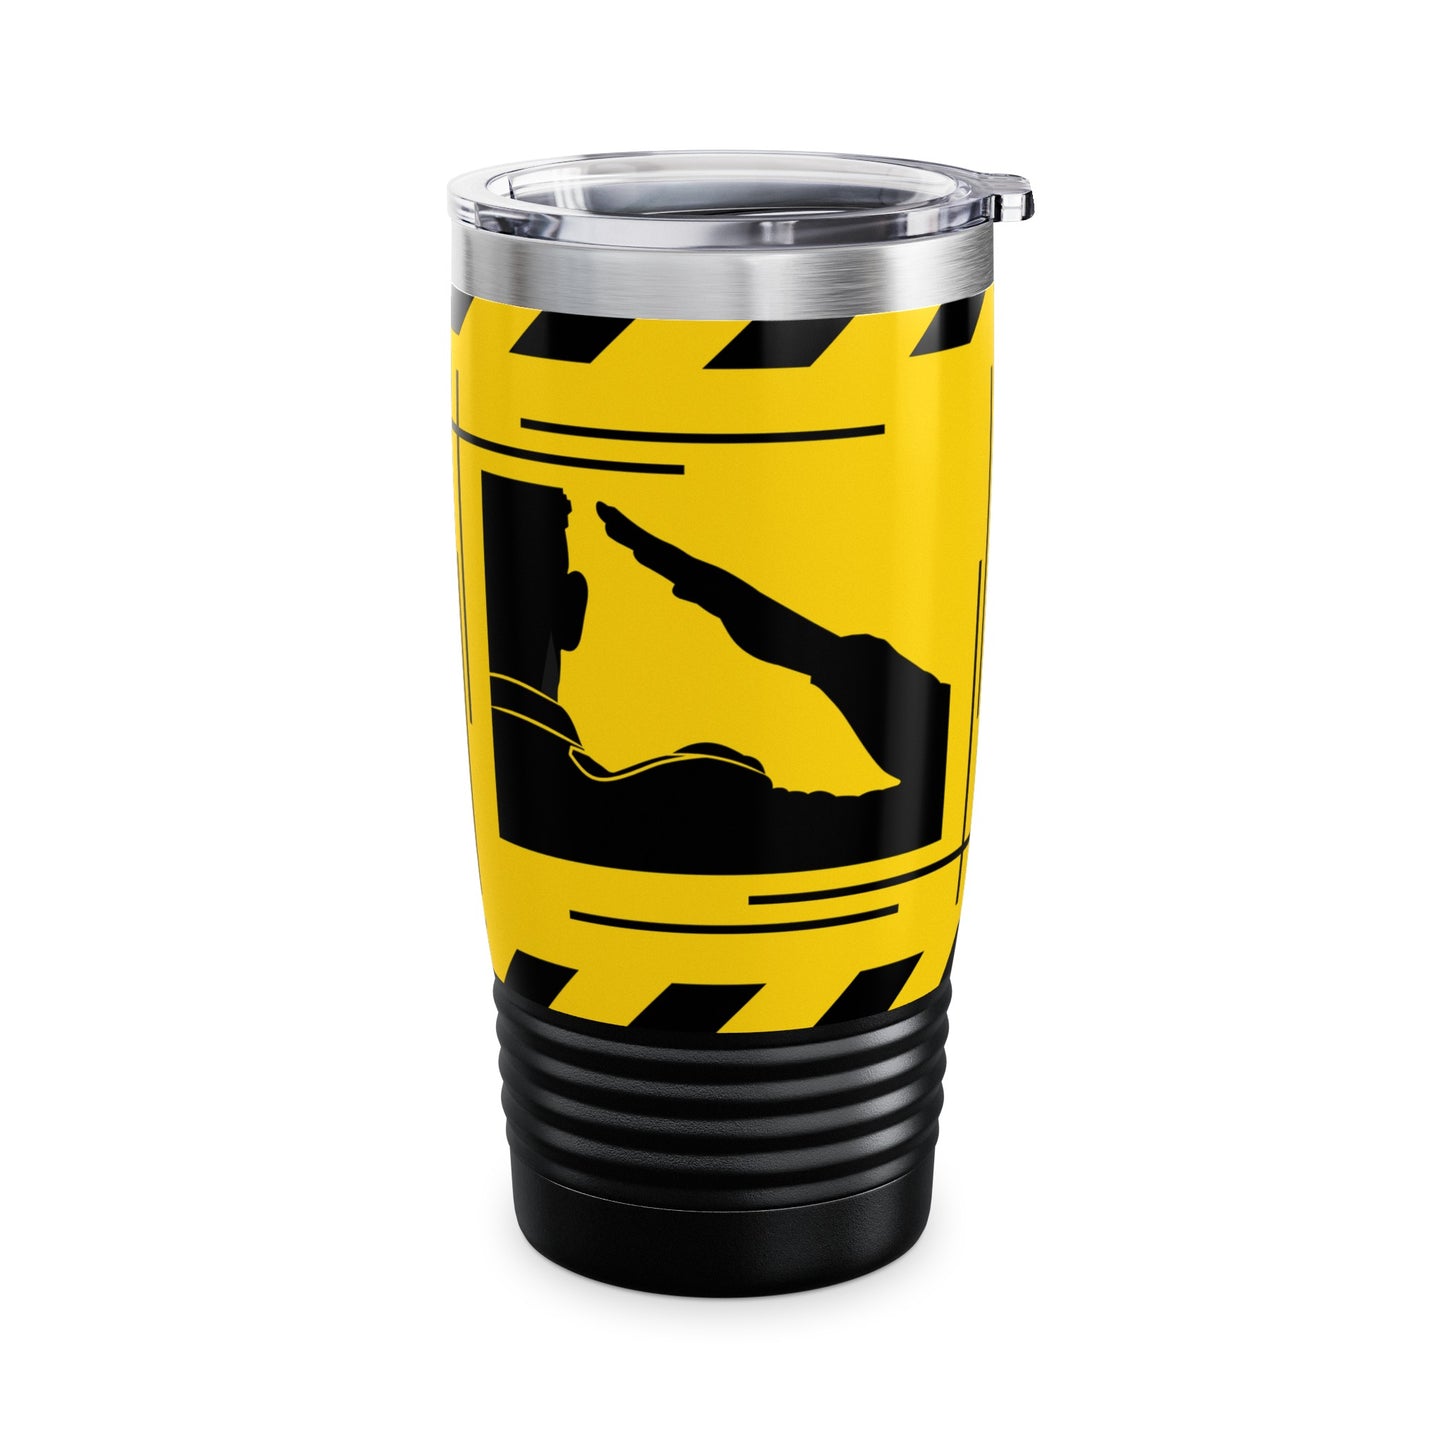 Relax, I'm A RETIRED VETERAN, And I Know Things - Ringneck Tumbler, 20oz